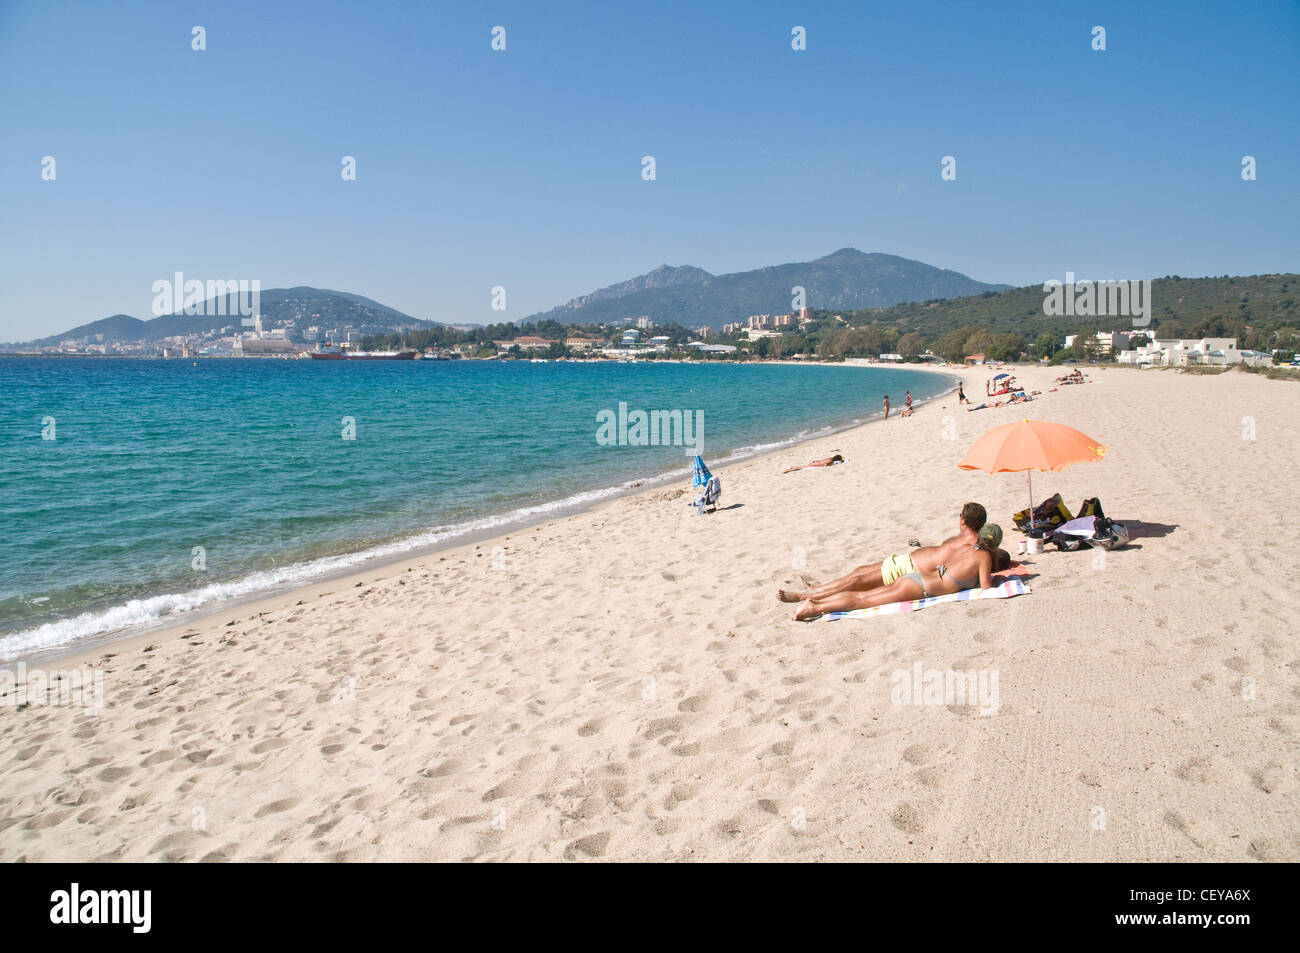 A vacationing couple enjoying the quiet at an empty Mediterranean sandy beach in the off-season, near Ajaccio, island of Corsica, France. Stock Photo